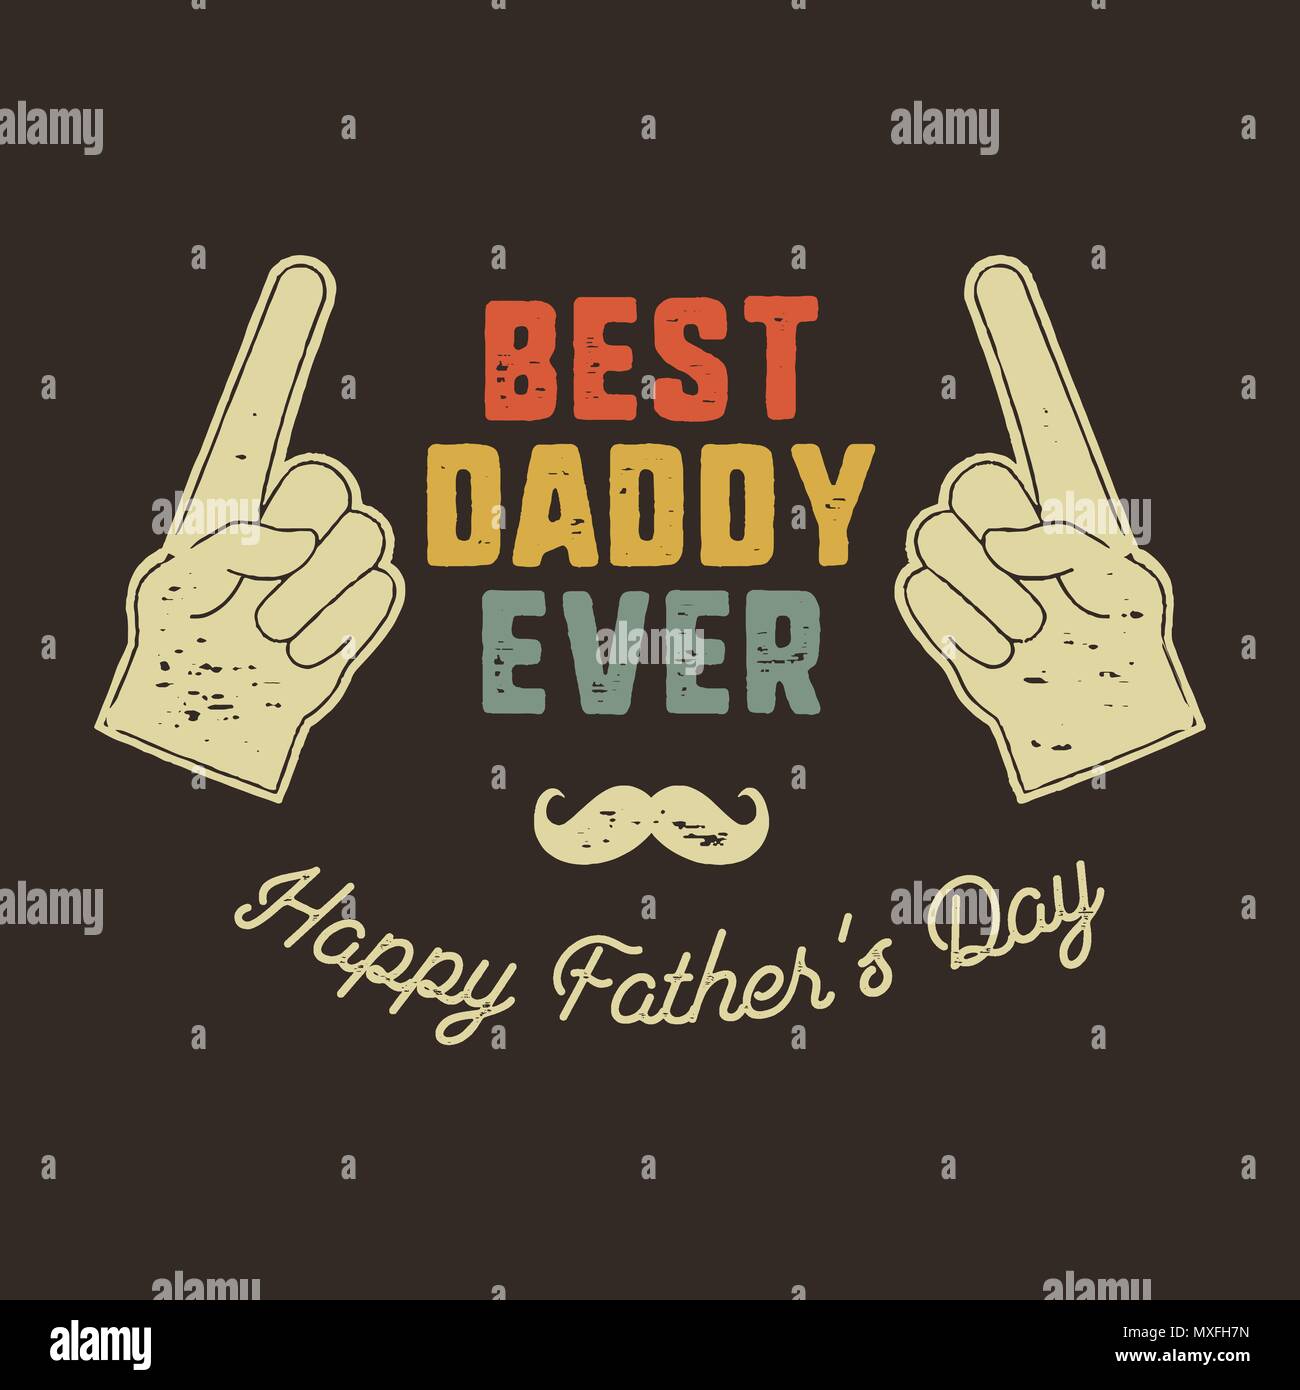 Download Best Daddy Ever T Shirt Retro Colors Design Happy Father S Day Emblem For Tees And Mugs Vintage Hand Drawn Style Funny Gift For Your Dad Or Grandpa Stock Vector Stock Vector Image